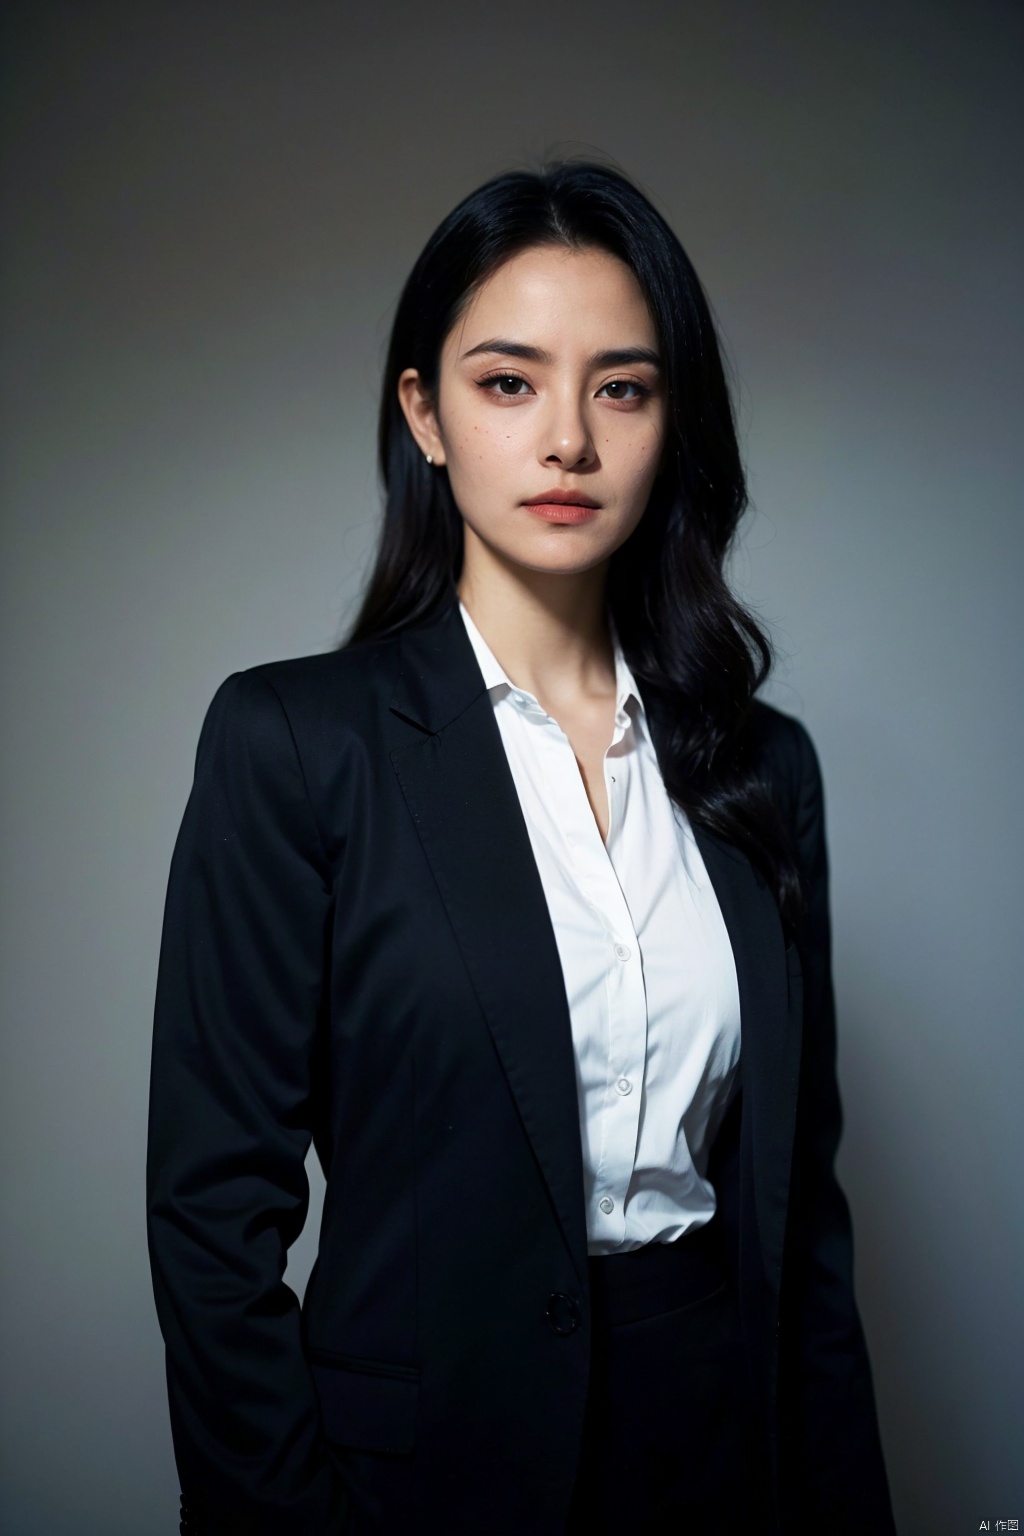  In a compelling and powerful portrait echoing the iconic style of Annie Leibovitz, we find a young professional woman standing against an unassuming monochromatic backdrop. She is captured in her element, exuding confidence and ambition in her tailored business attire—a crisp white shirt beneath a sleek black blazer, accessorized with understated yet elegant jewelry.

Her gaze is fixed beyond the frame, communicating both focus and determination, while her stance is poised and assertive, embodying the spirit of modern-day achievement. The photograph emphasizes the texture and clean lines of her attire, juxtaposed against the simplicity of the background to draw attention to her presence and character.

Render this image with (8K resolution, best quality: 1.5), (crisp detail on clothing textures: 1.7), (sharp focus on facial expression: 1.9), (subtle, directional lighting to highlight contours: 2.0), (monochromatic background for maximum subject contrast: 1.3), (precise composition that underscores professionalism and femininity: 1.6), (cinematic color grading that enhances mood without distraction: 1.8), (gestural nuances that convey strength and poise)., ((poakl))